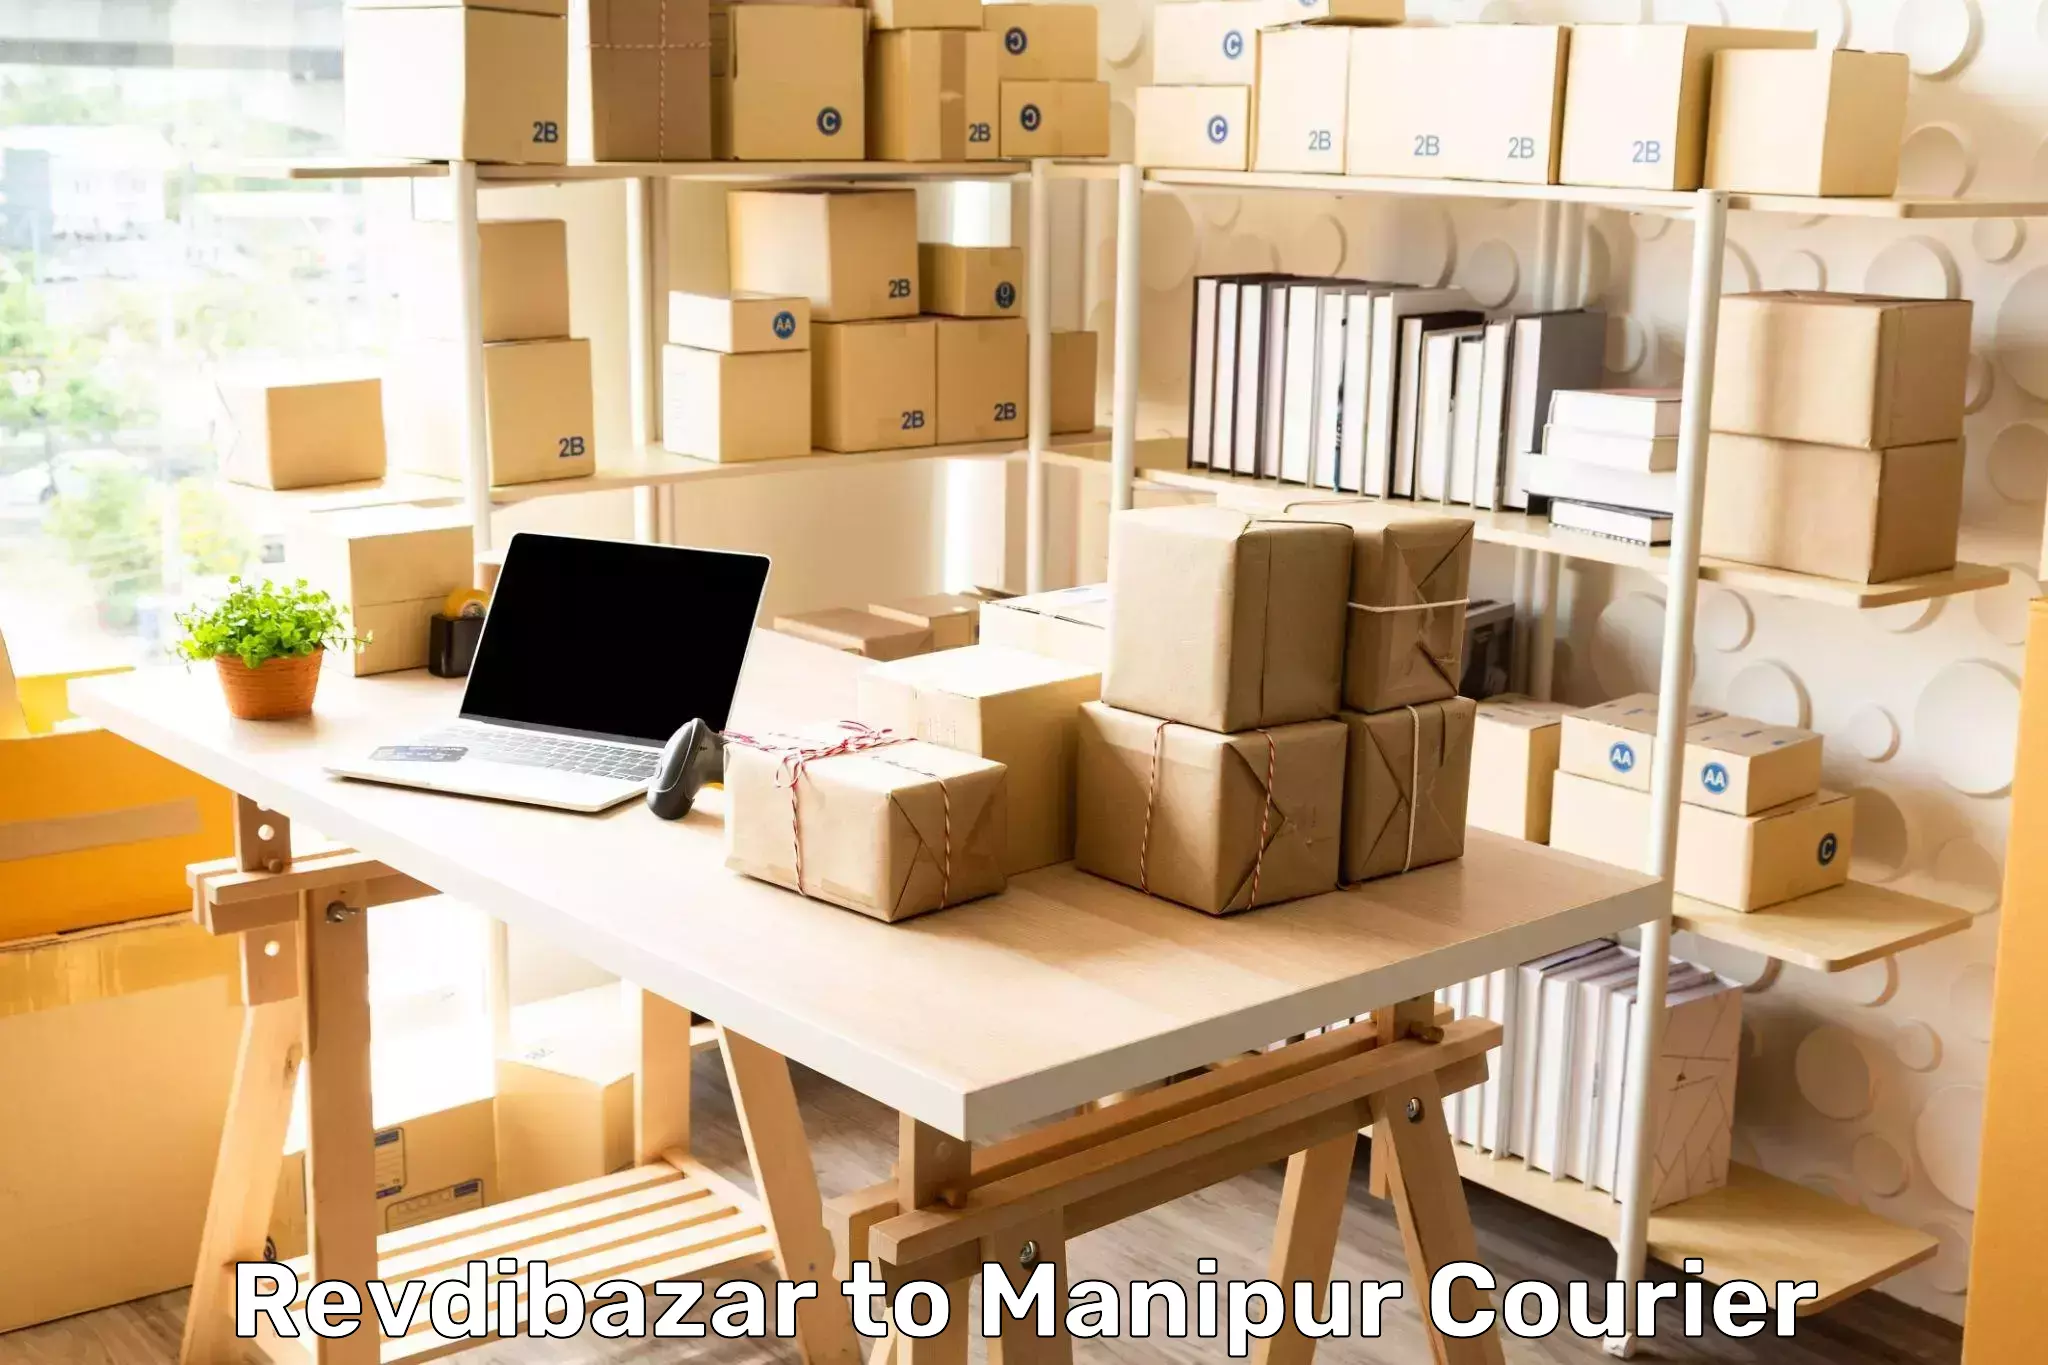 Courier service partnerships Revdibazar to Kakching